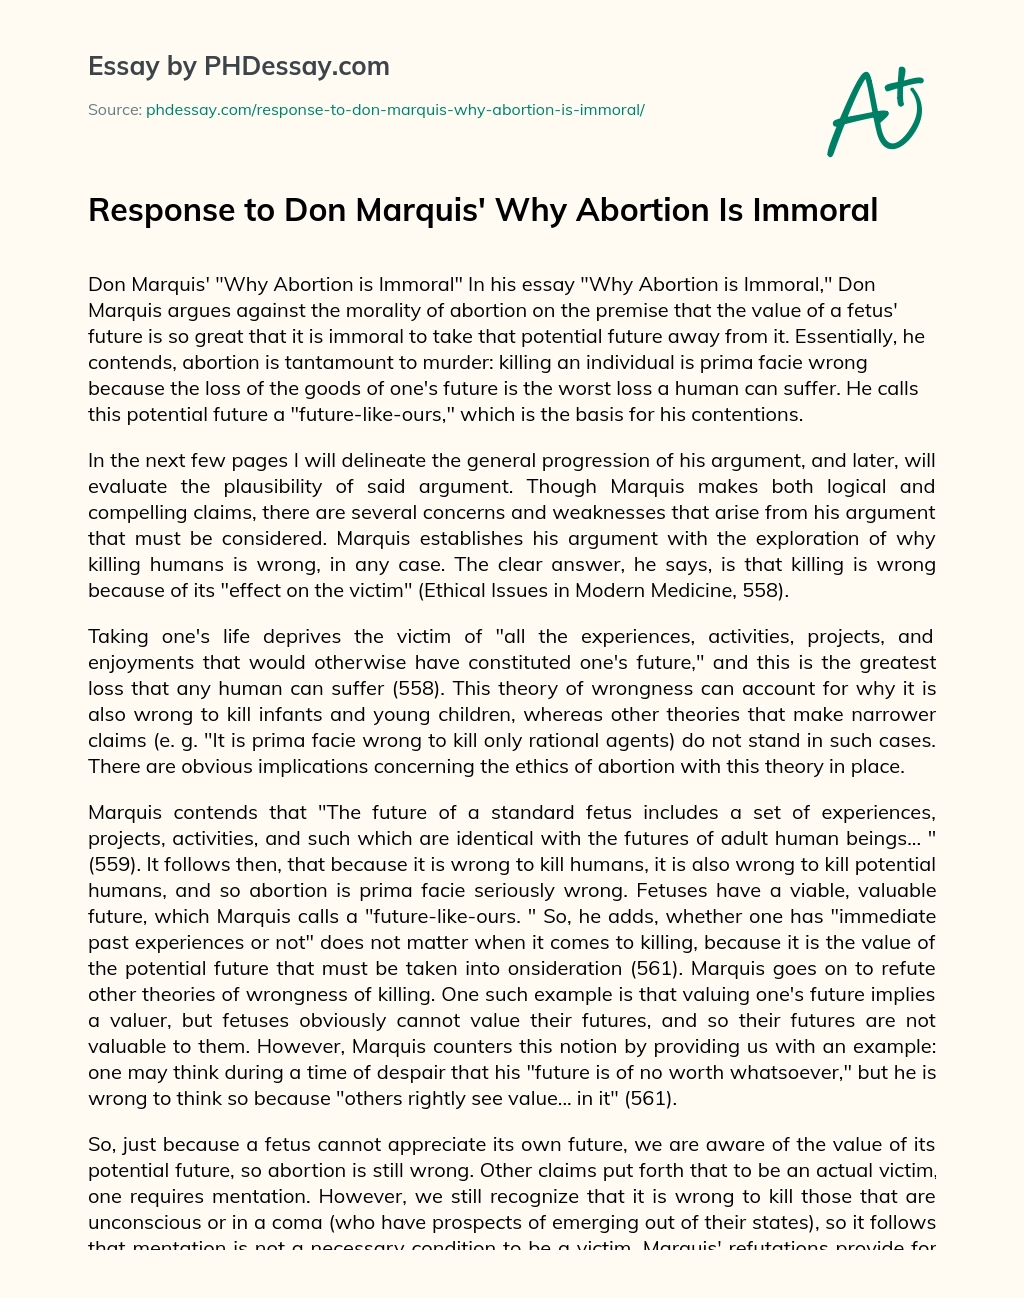 Response to Don Marquis’ Why Abortion Is Immoral essay